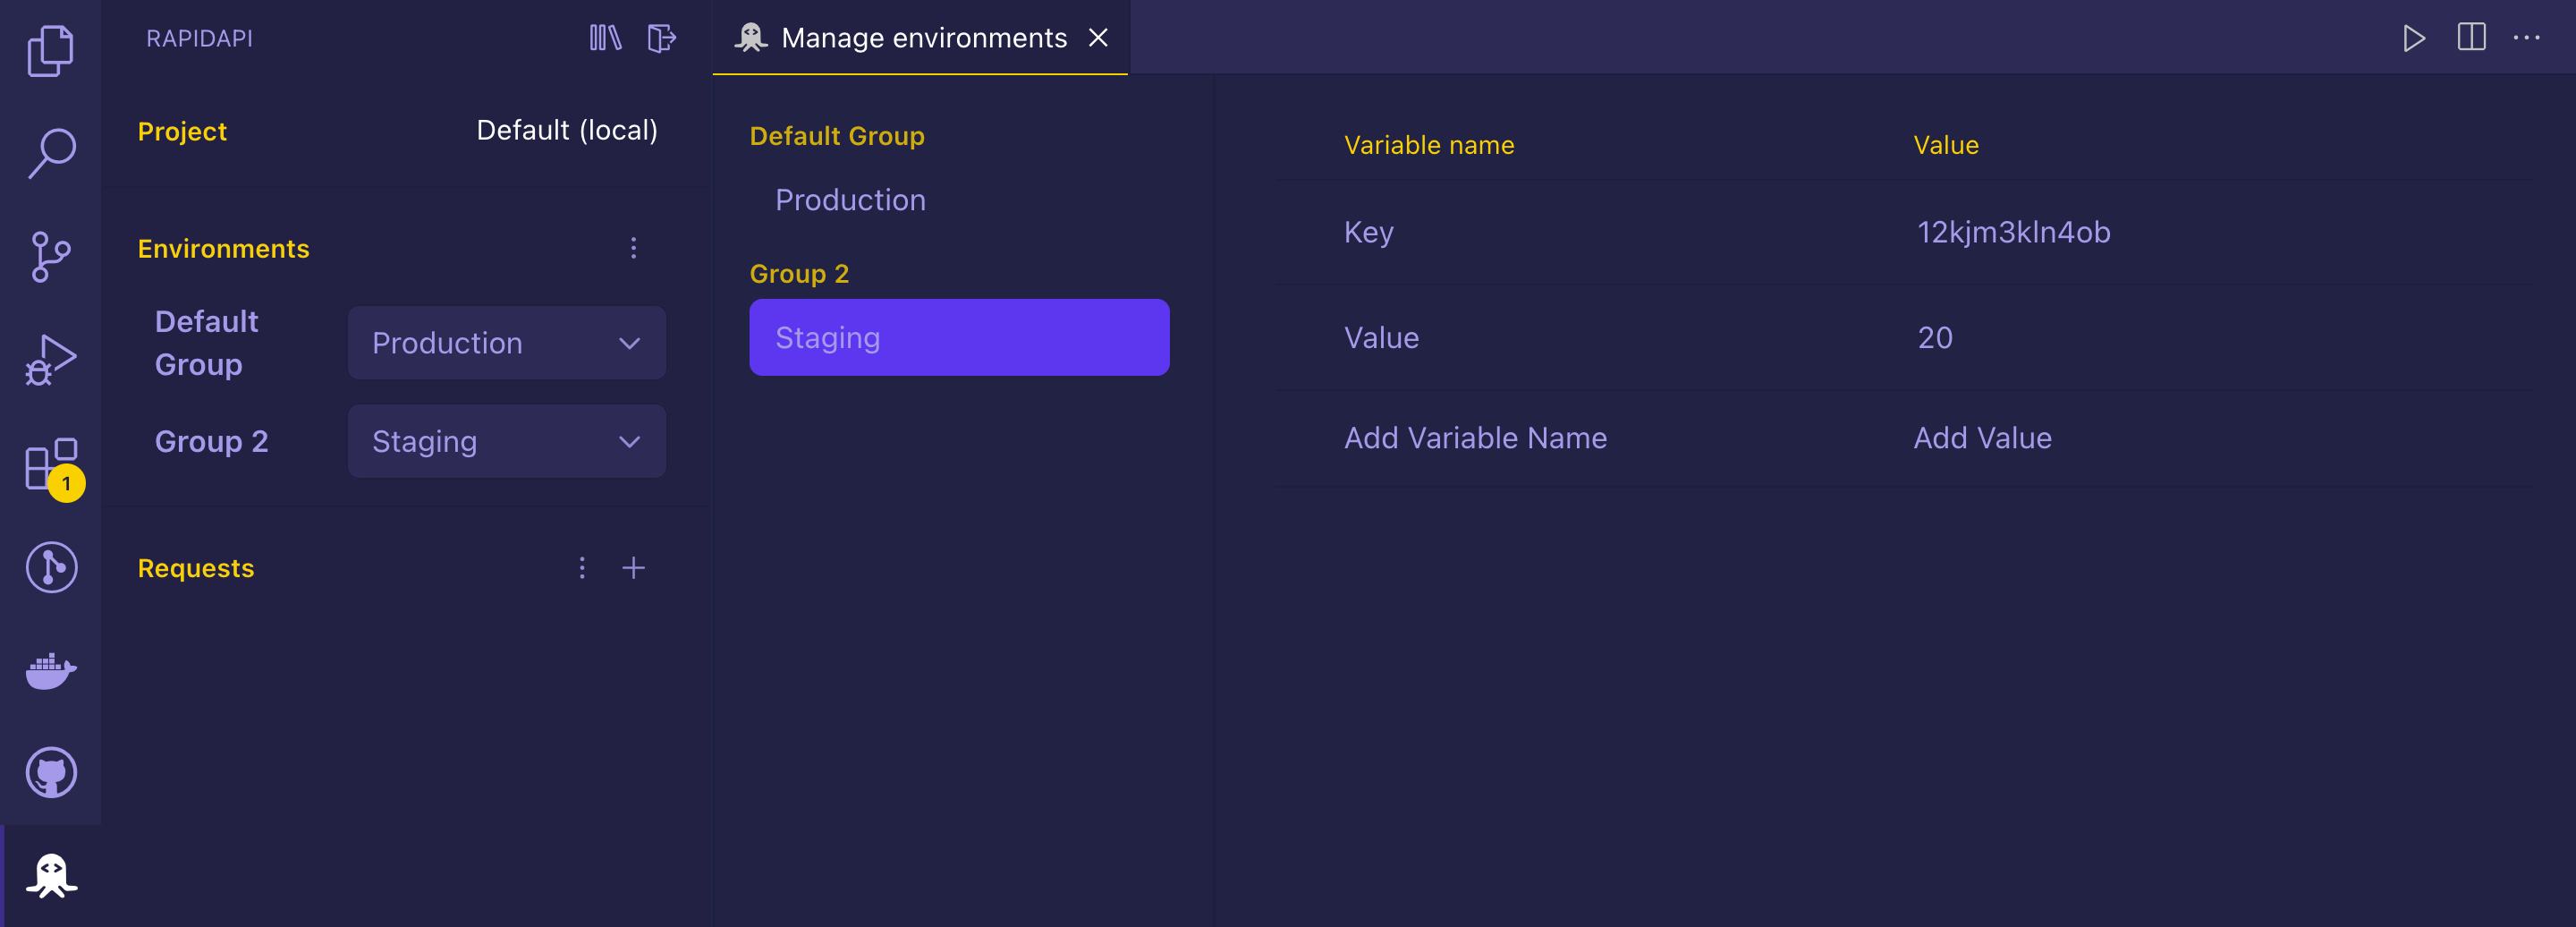 Managing Environments in Rapid
API Client